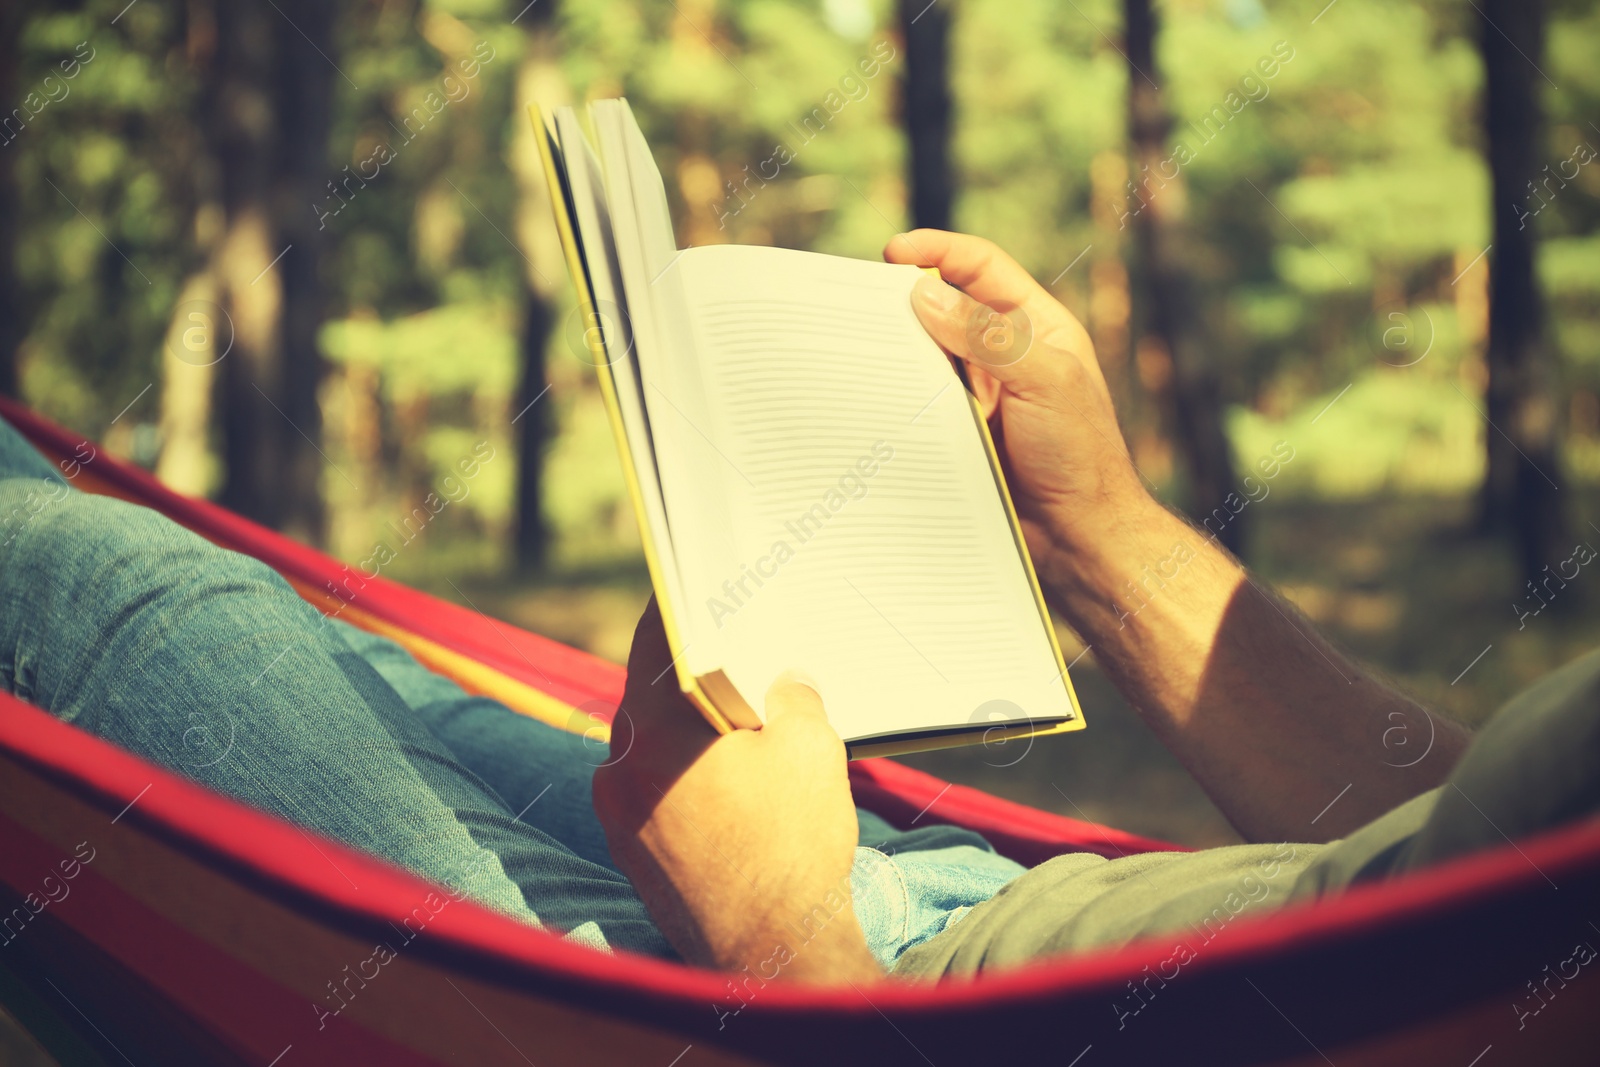 Photo of Man with book relaxing in hammock outdoors on summer day, closeup